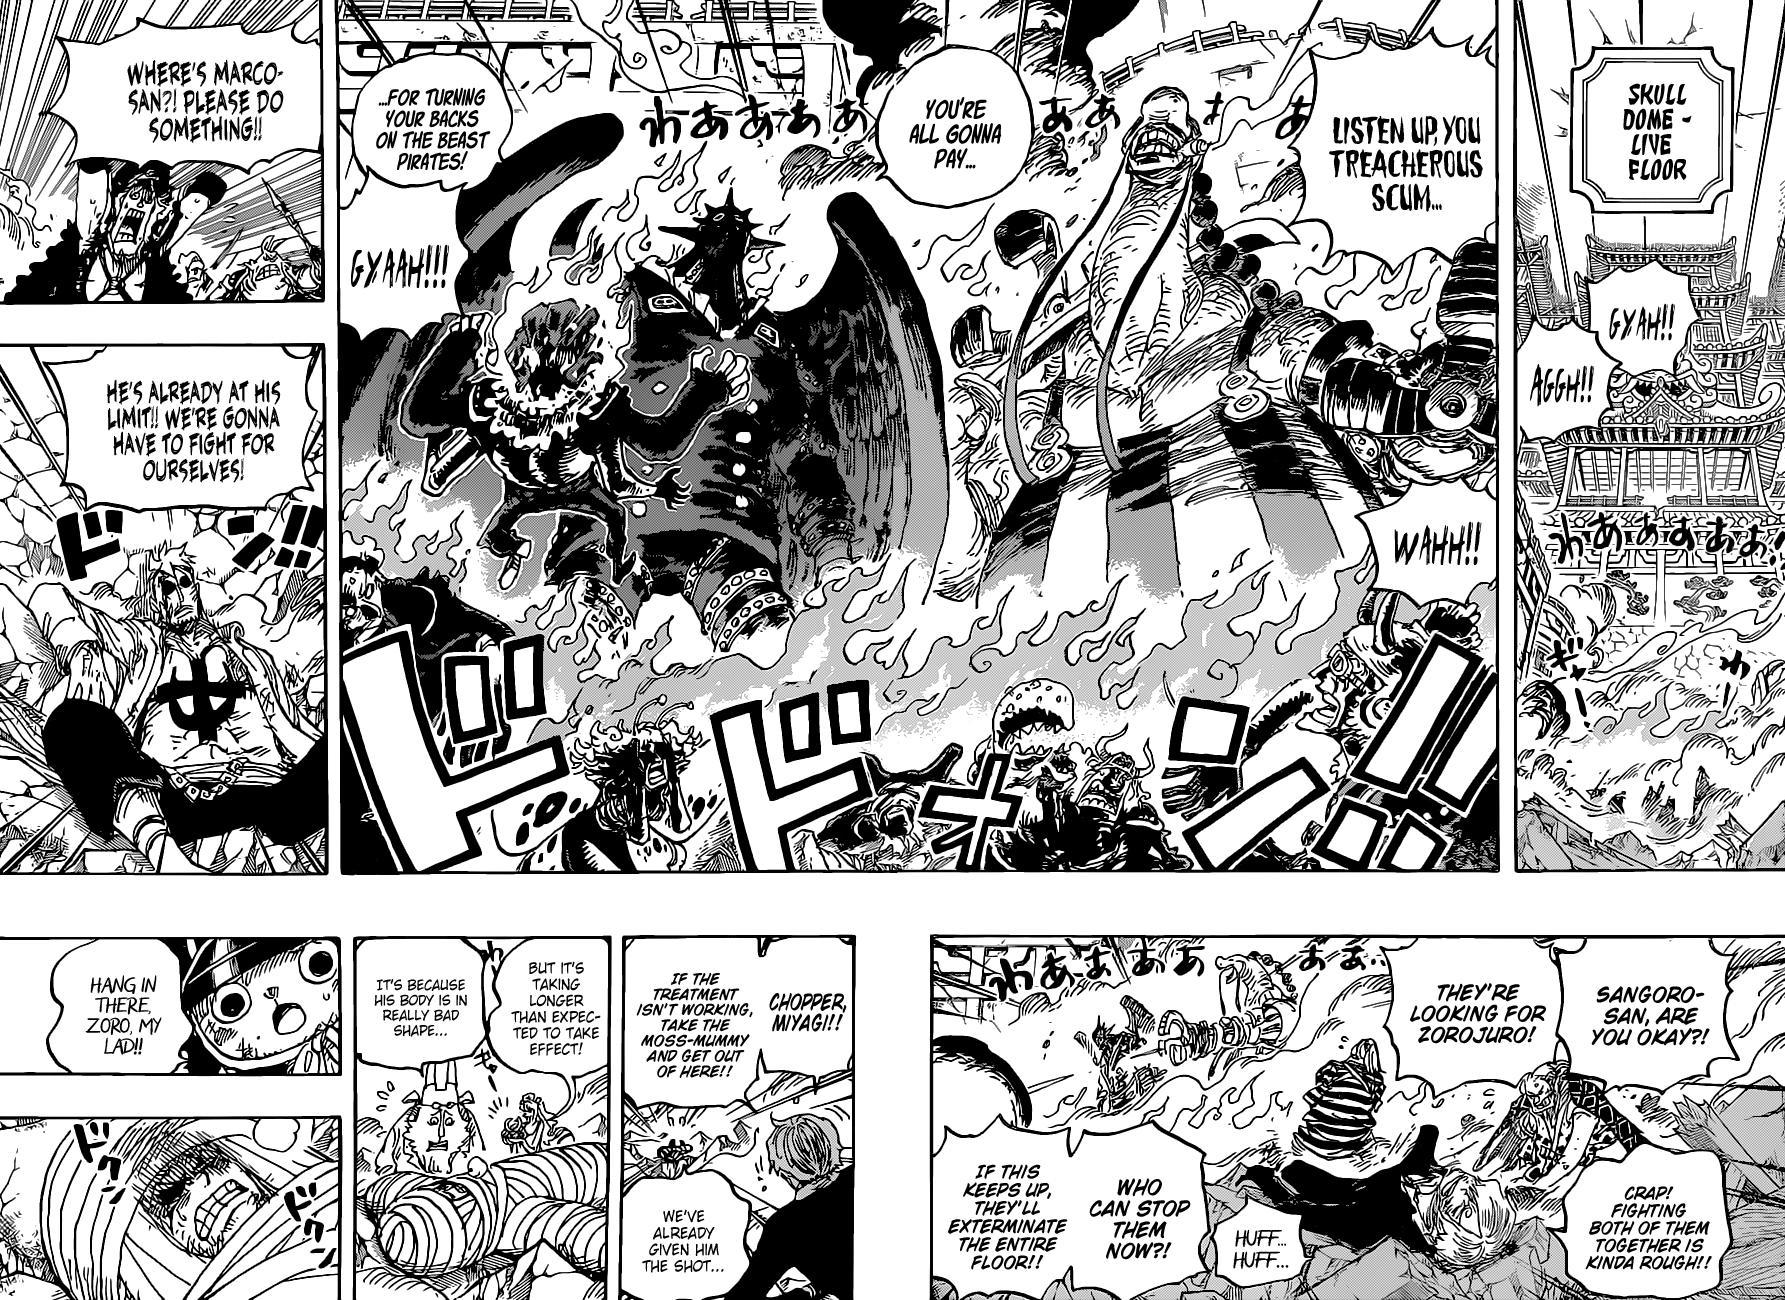 One Piece Chapter 1022 spoilers: Luffy to become king of Pirates